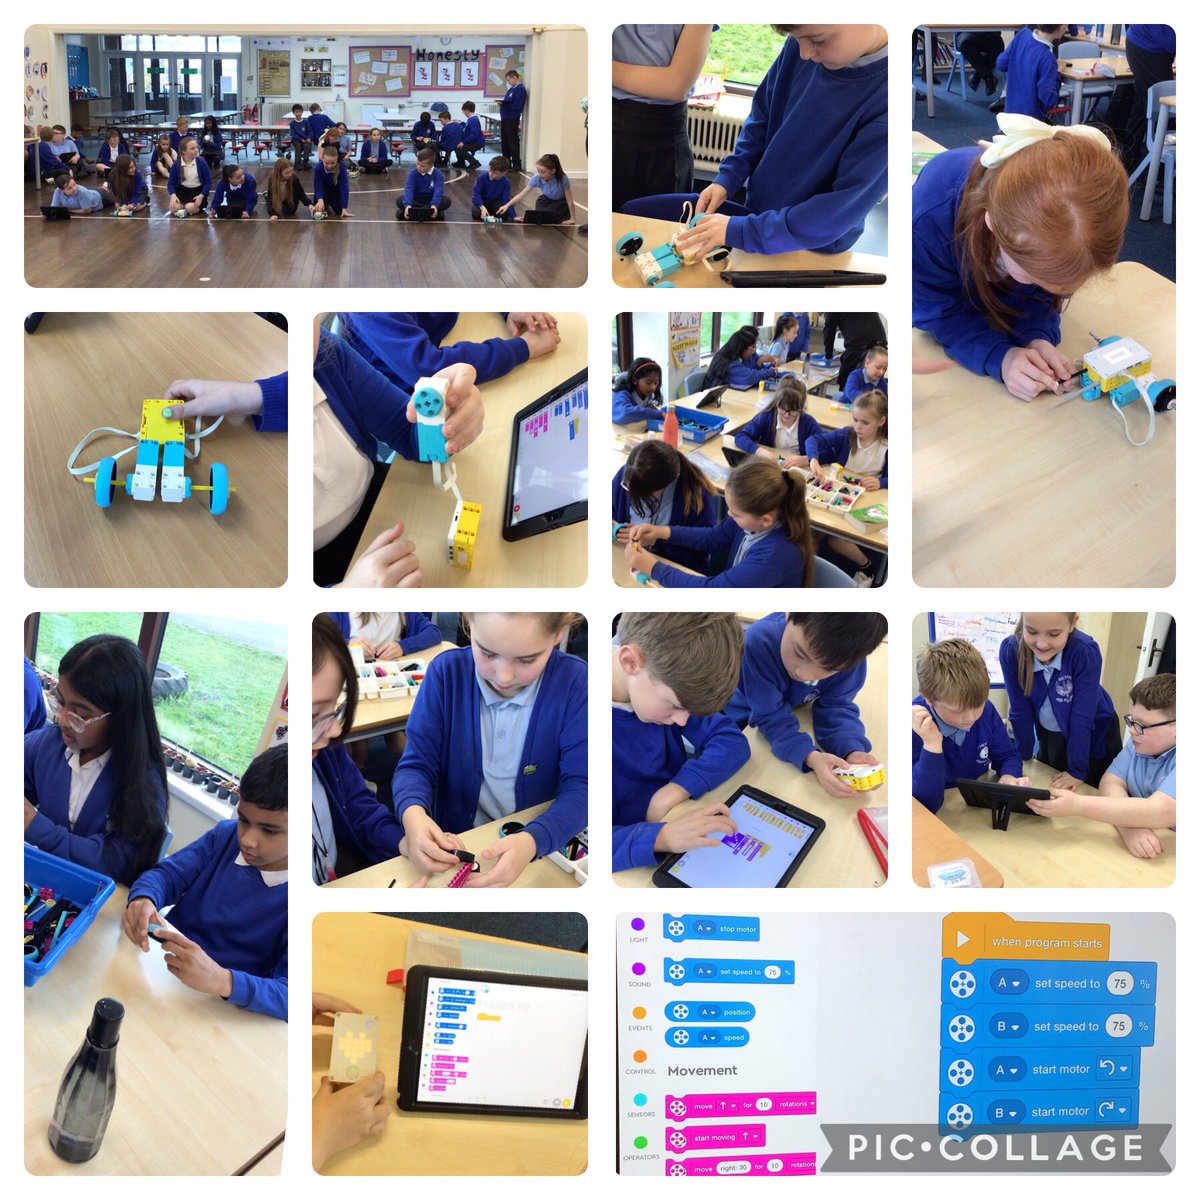 Year 5 loved their Robot Olympic session with @hiimpactconsult this week🤖🤩 They designed and built robots to compete in events such as the agility course, drag race and the last robot standing. #SMAAAComputing